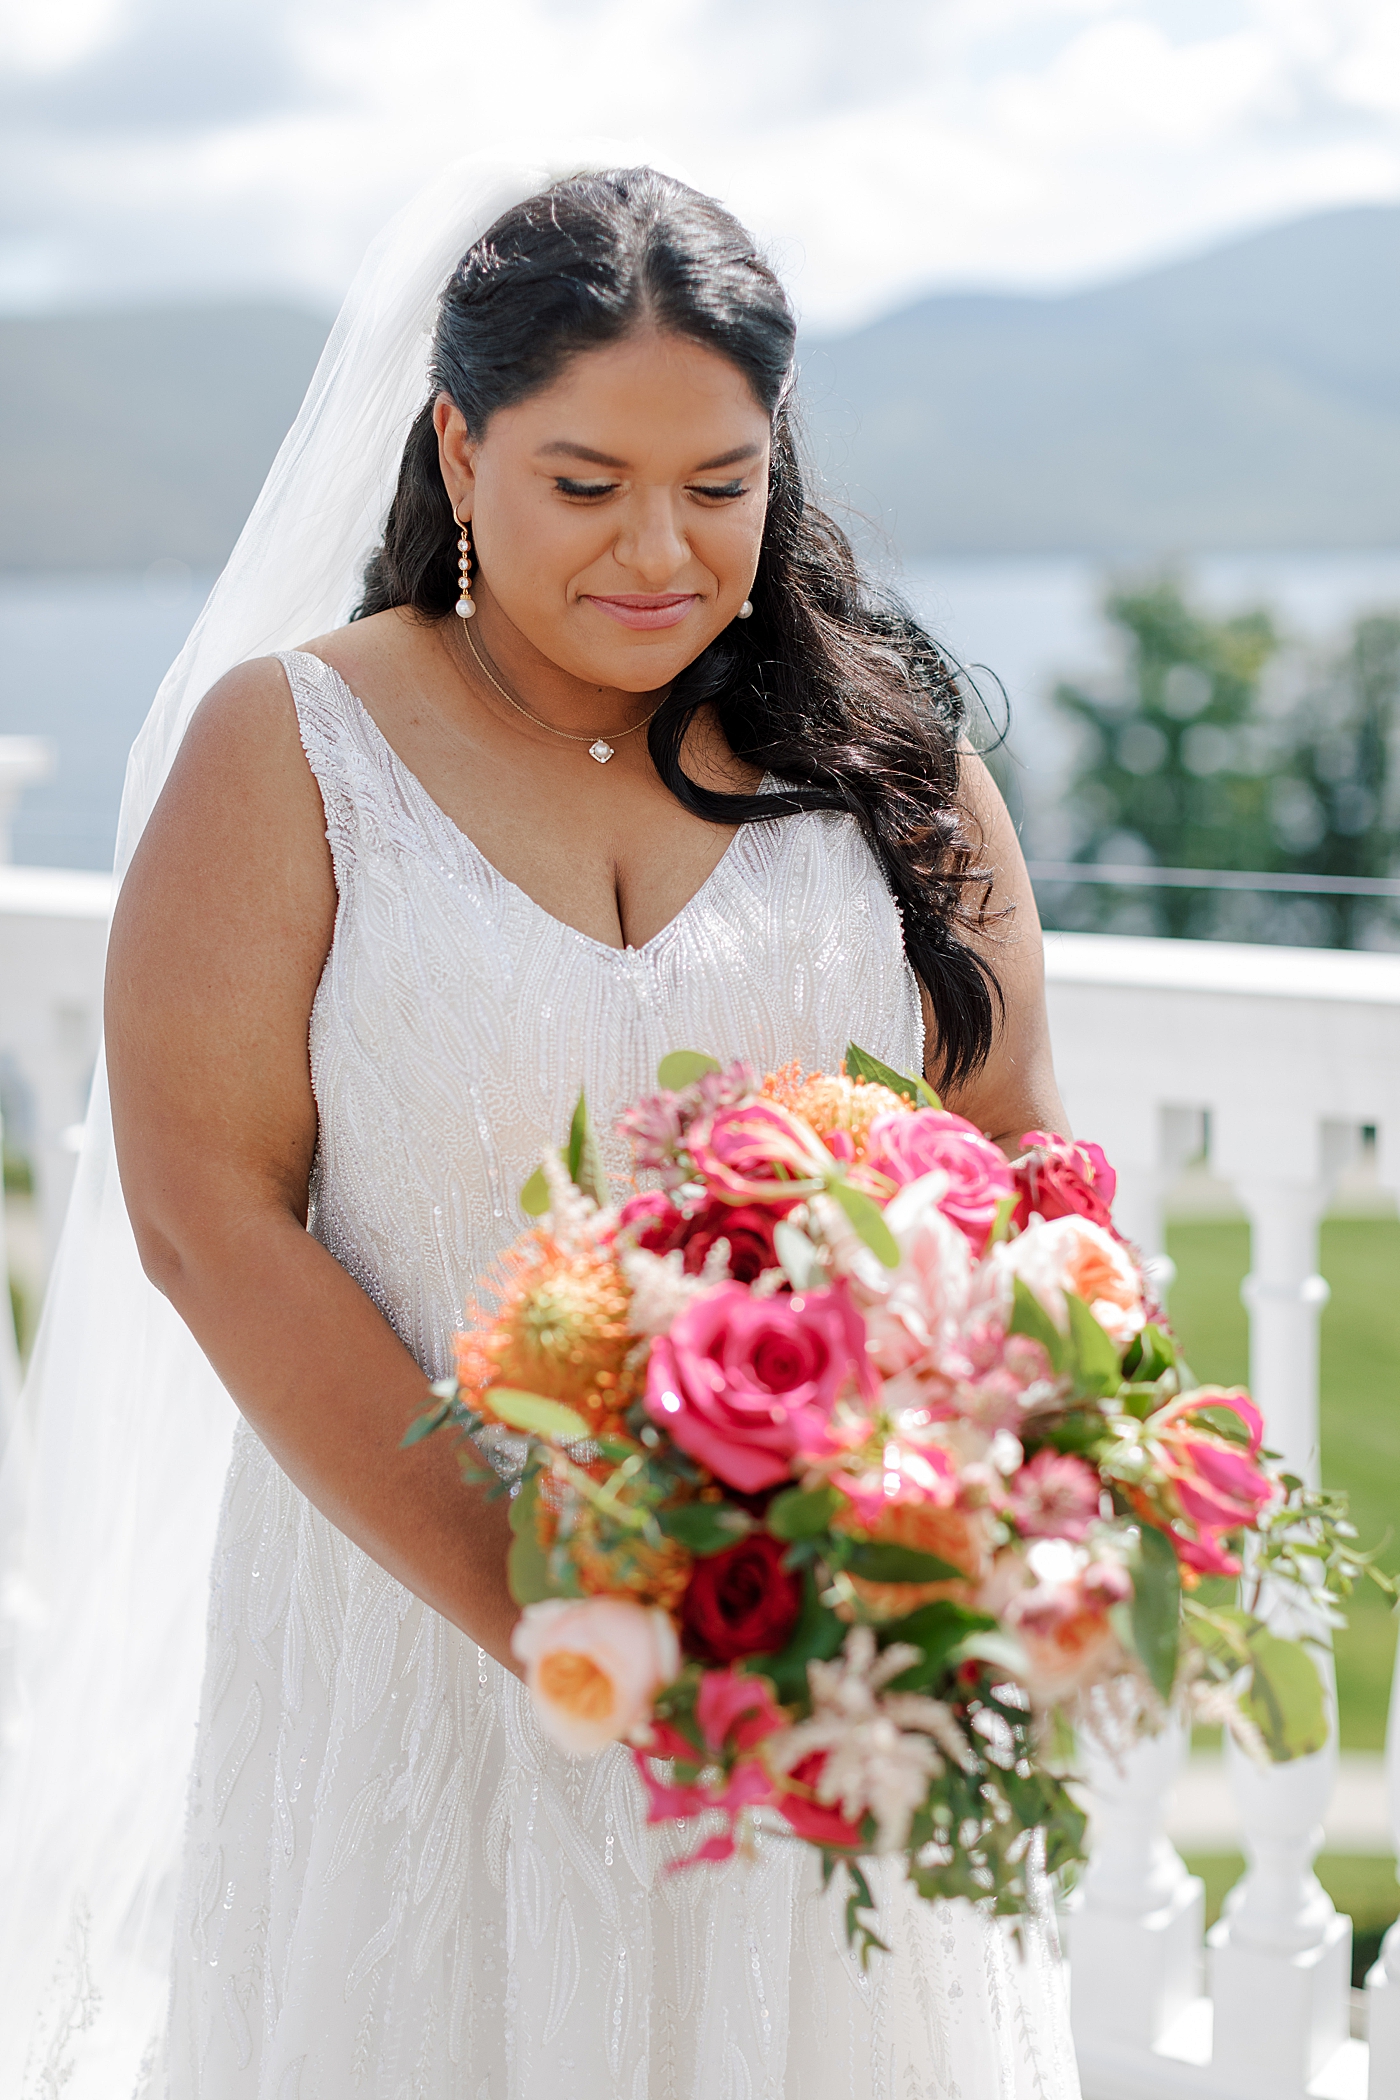 Close up bridal portrait with veil and colorful bridal bouquet | Image by Hope Helmuth Photography